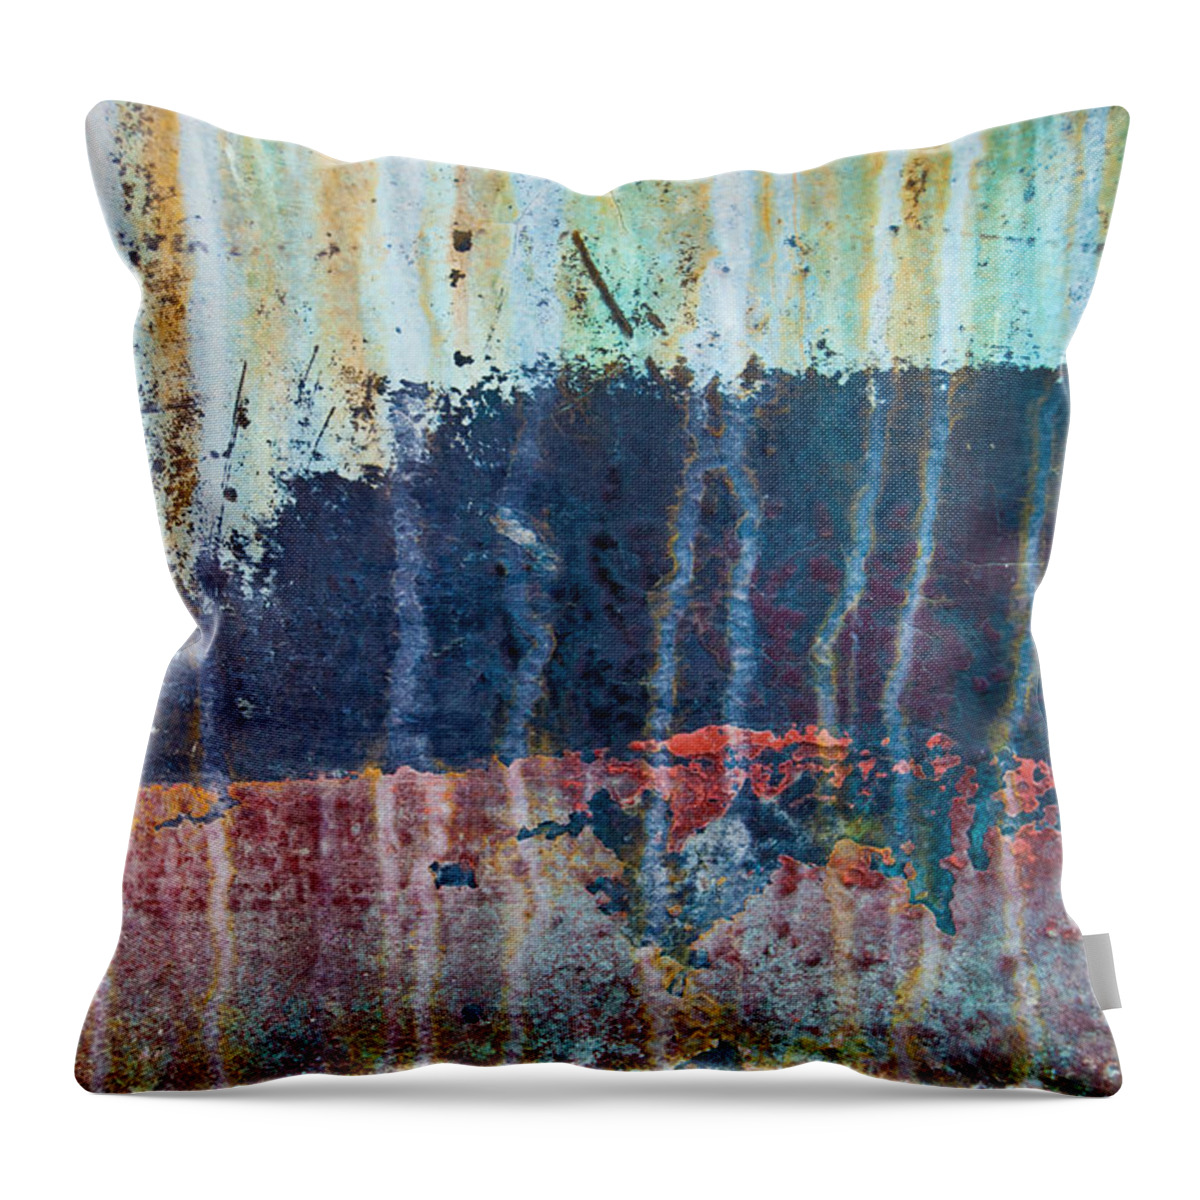 Industrial Throw Pillow featuring the photograph Abstract Landscape by Jani Freimann